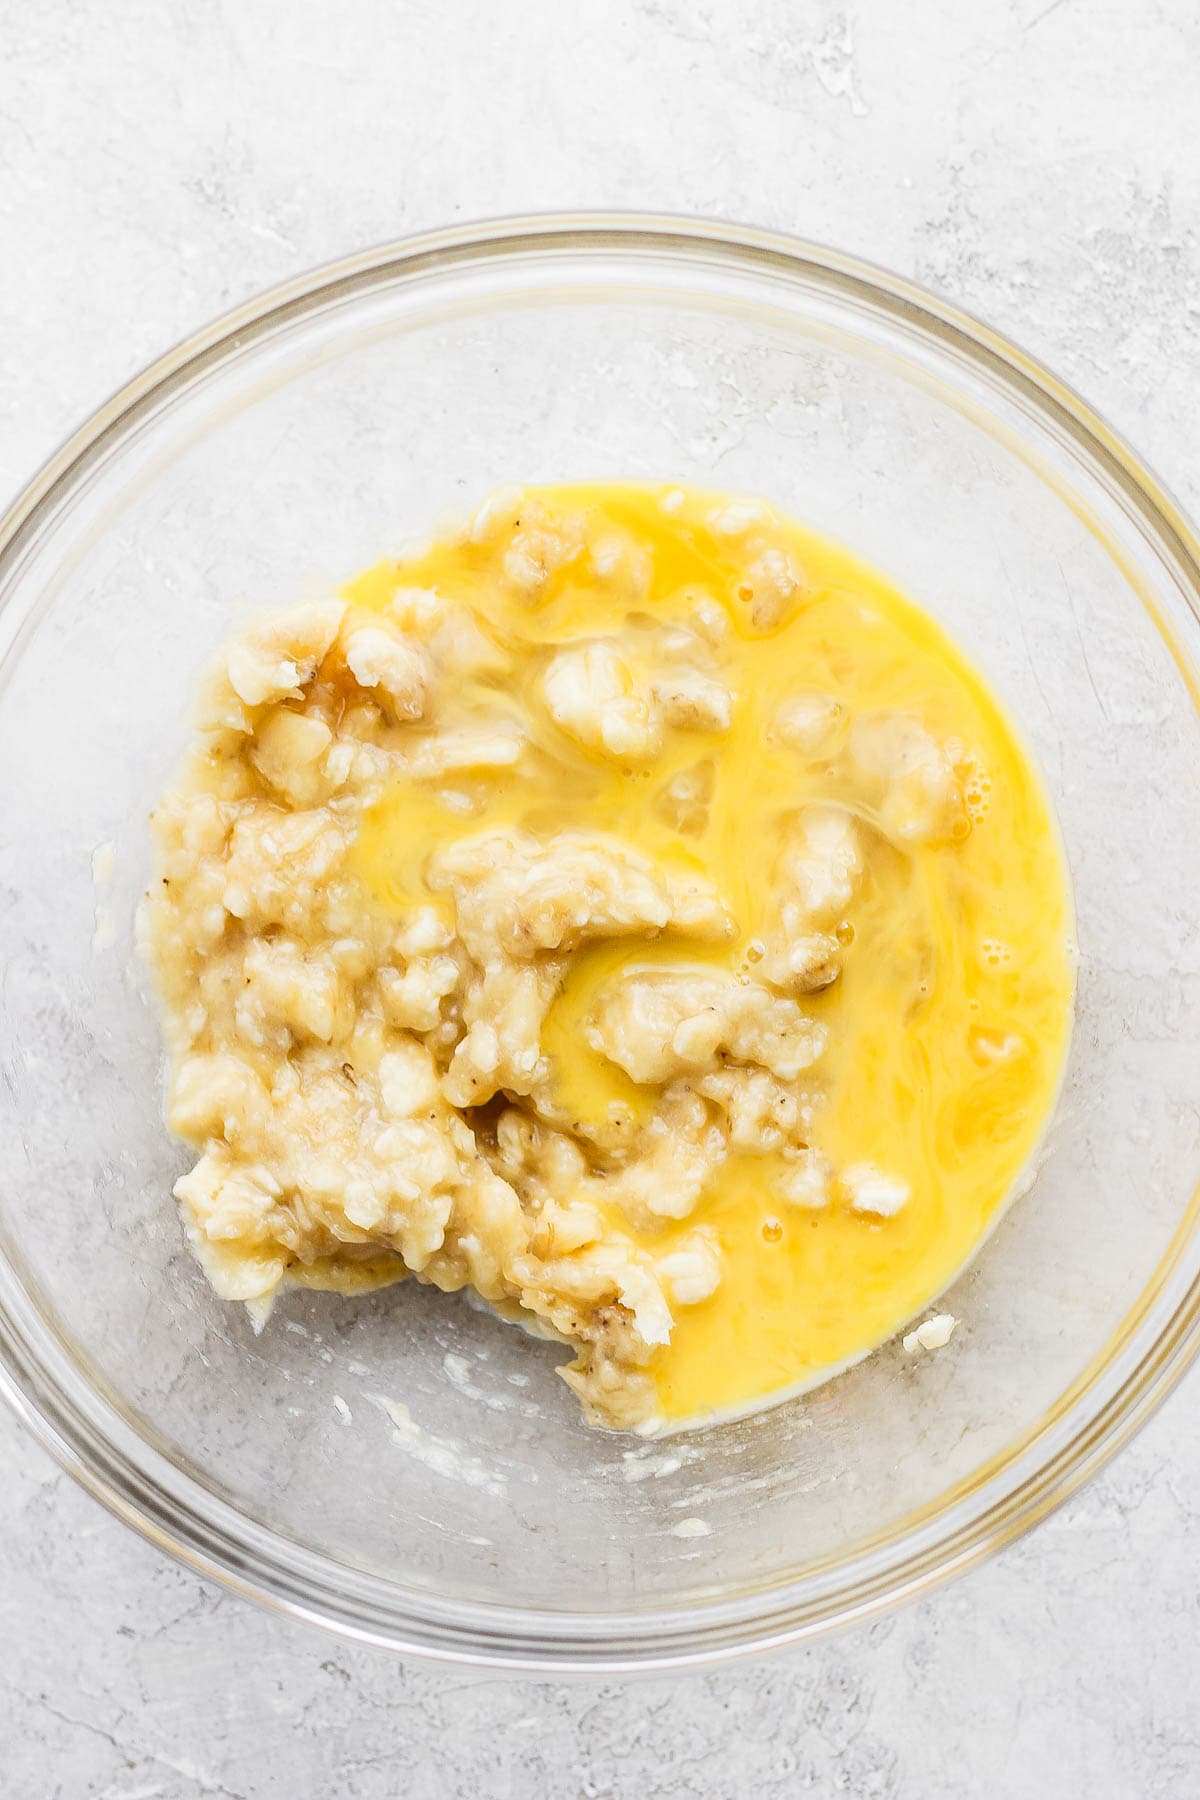 A bowl of mashed bananas and a beaten egg.